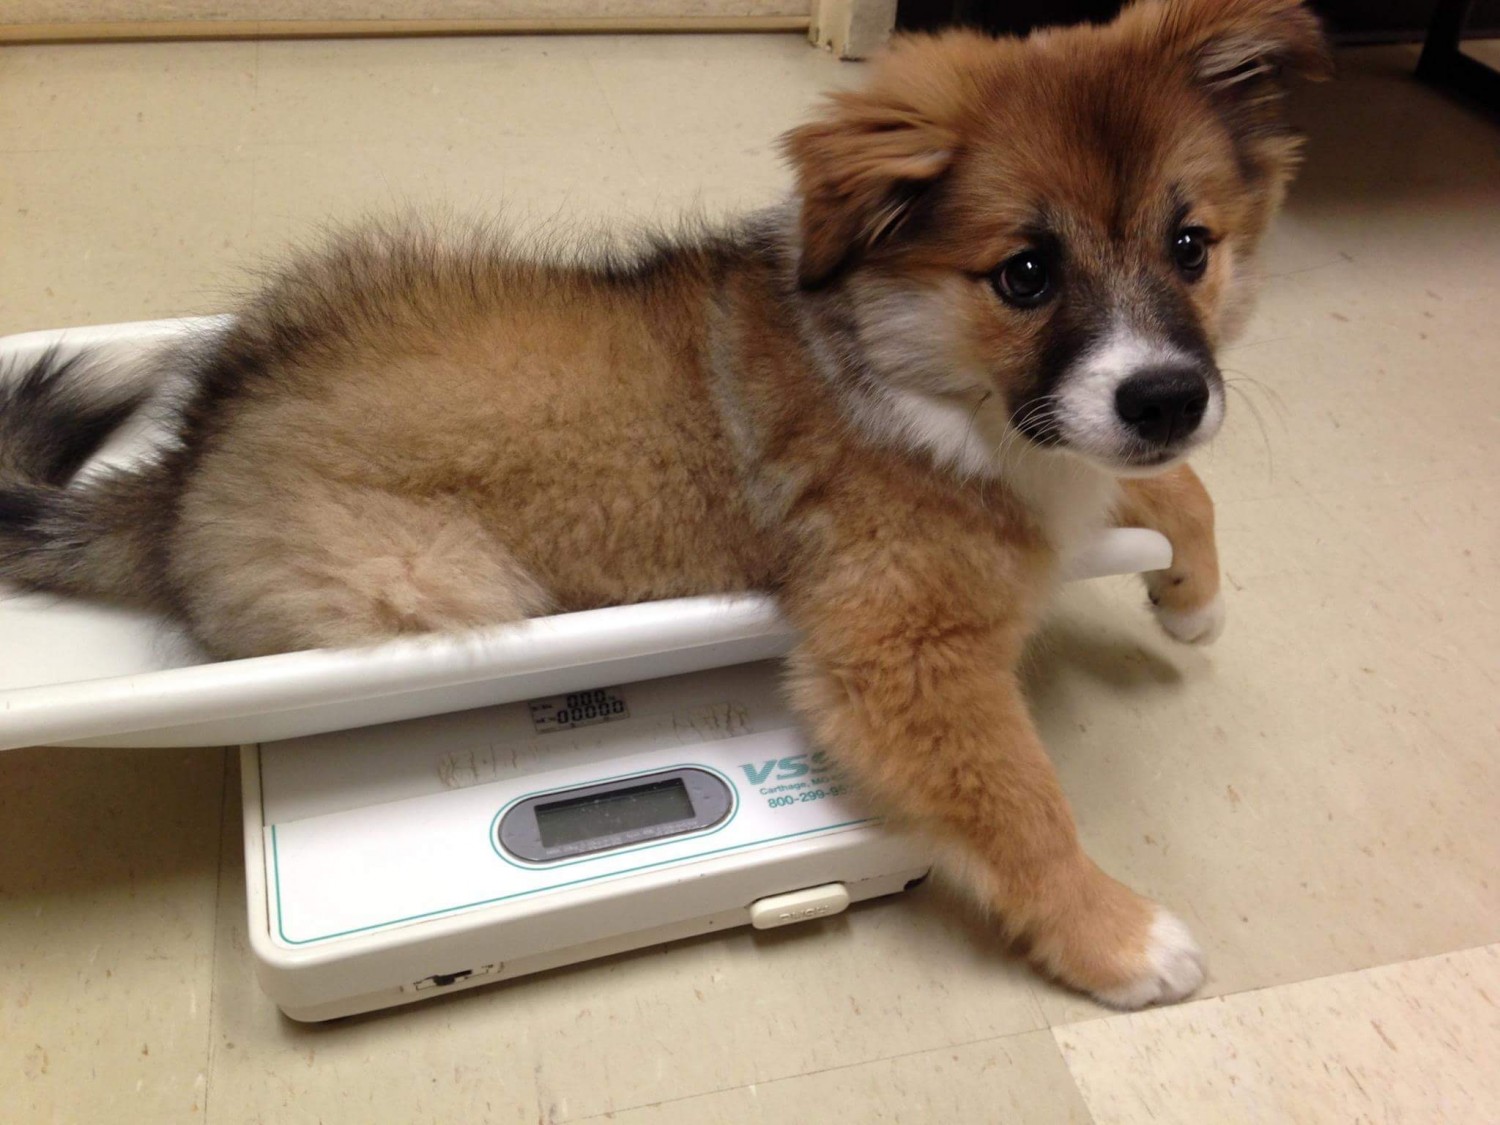 Puppy on Scale